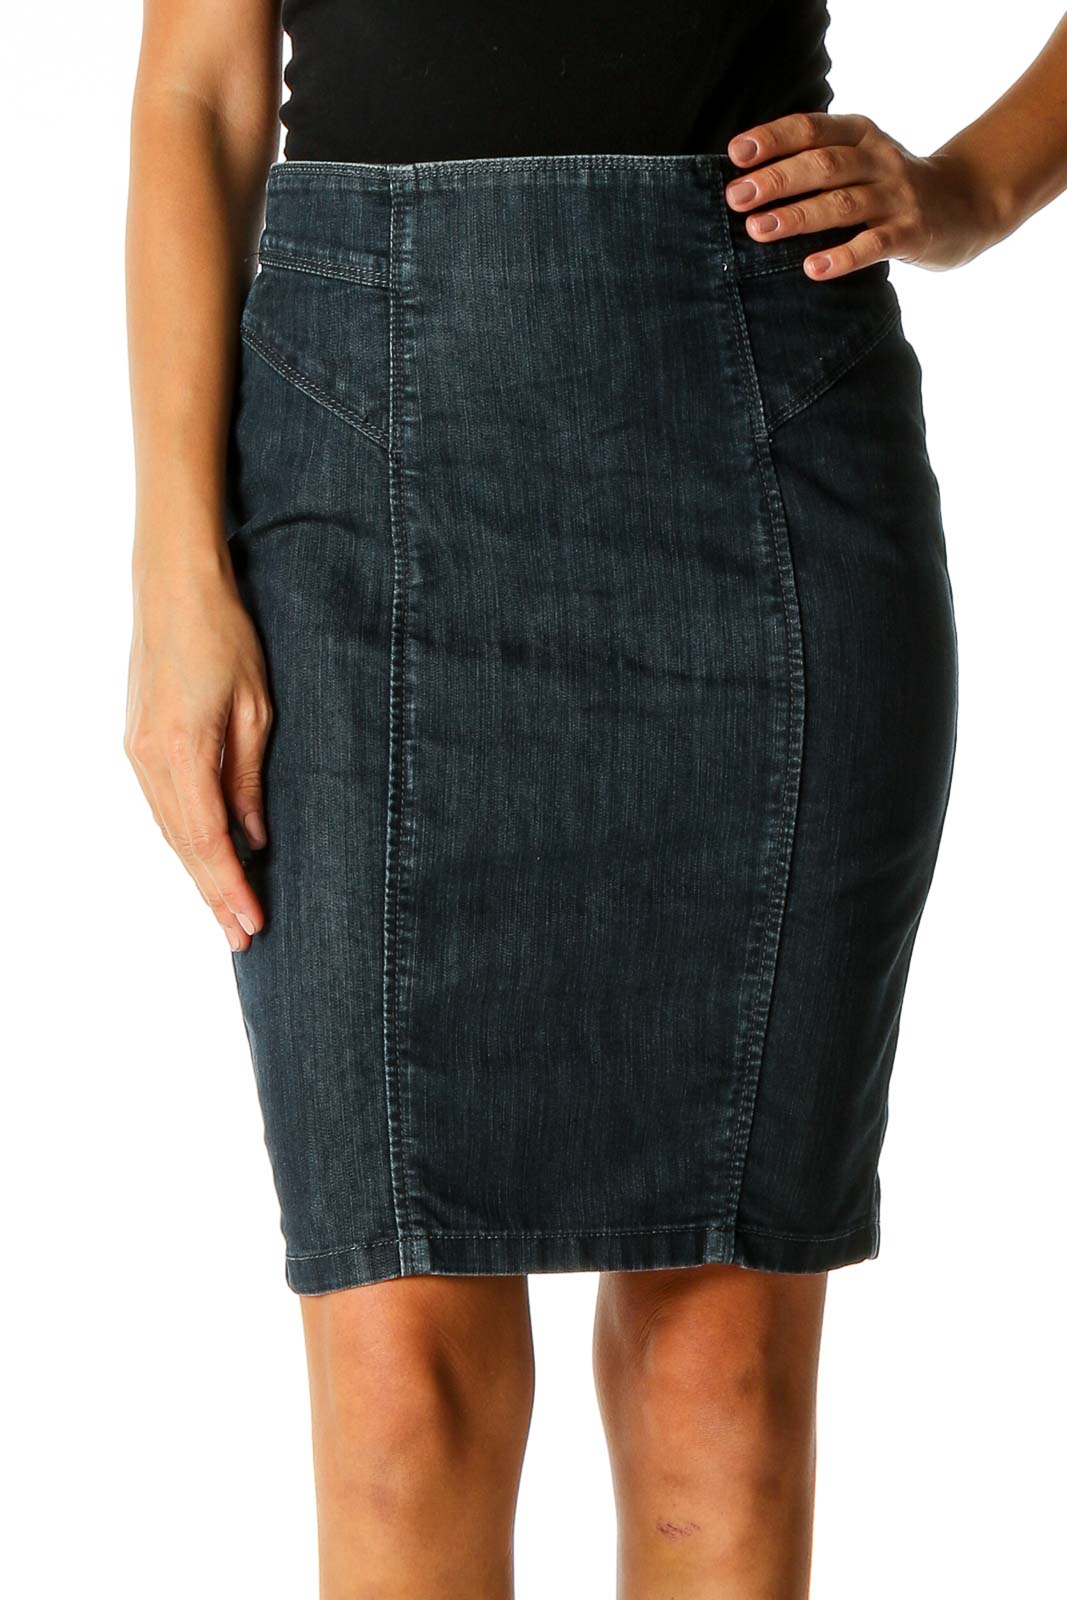 Blue Casual Pencil Skirt Front